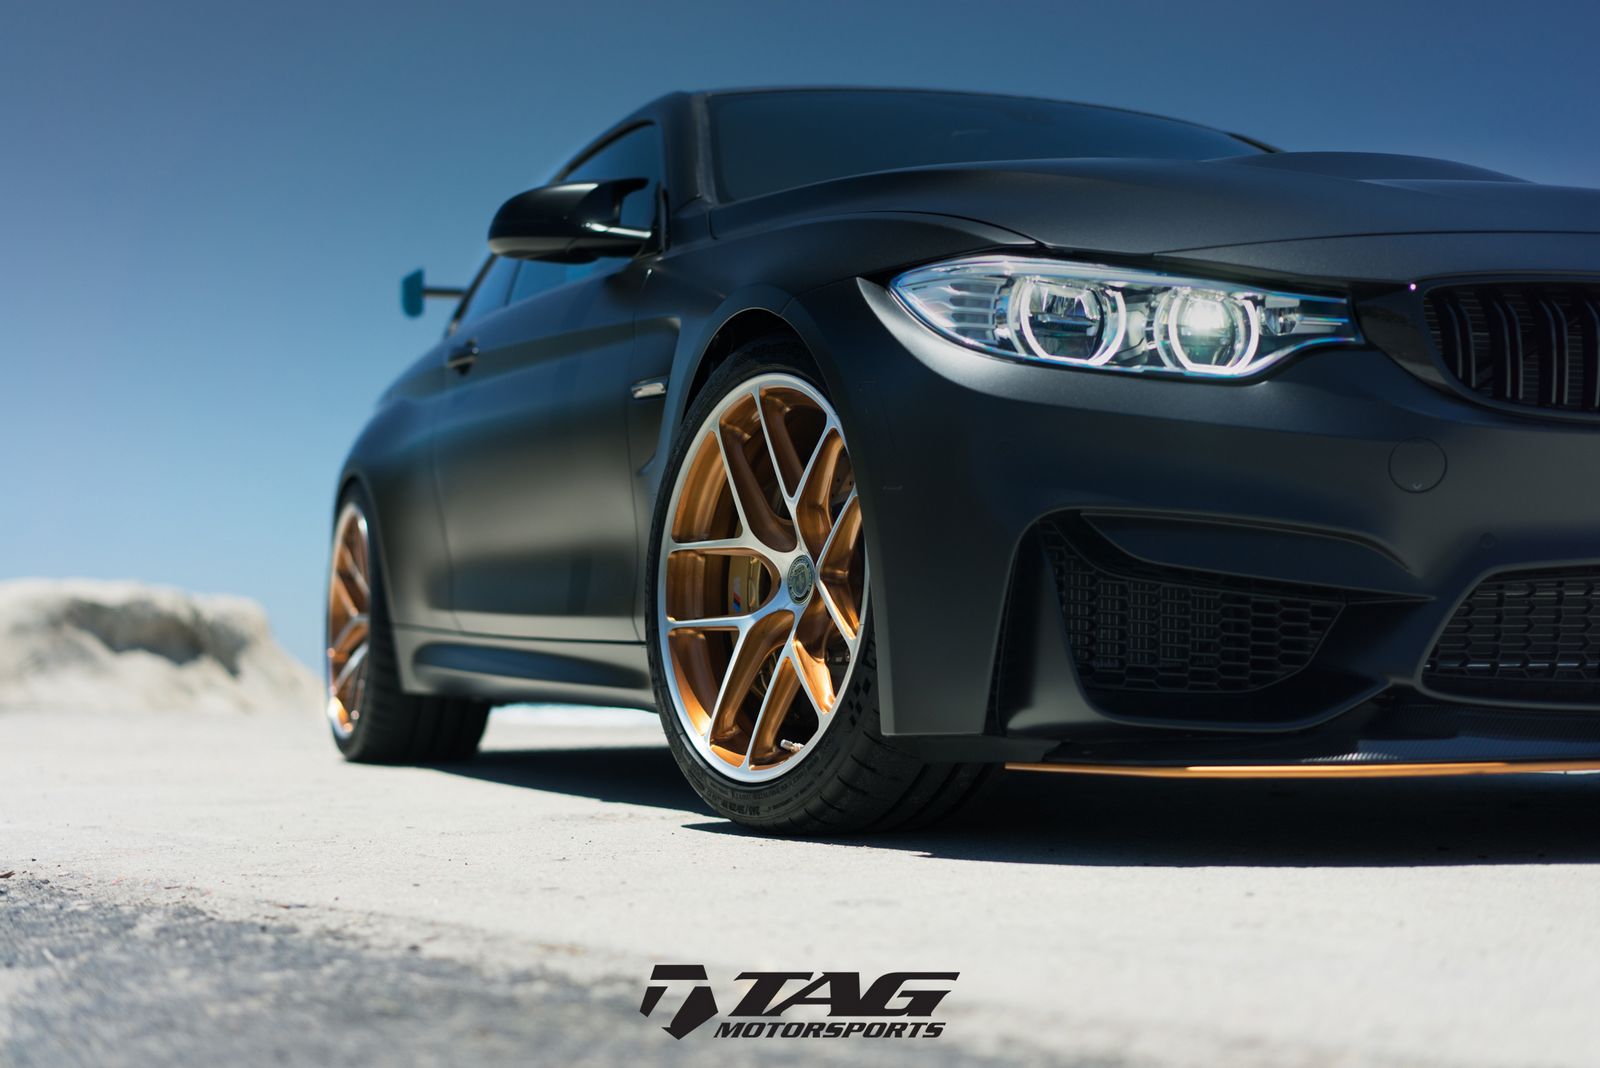 BMW M4 GTS Looks Ready To Attack In Matte Black | Carscoops1600 x 1068